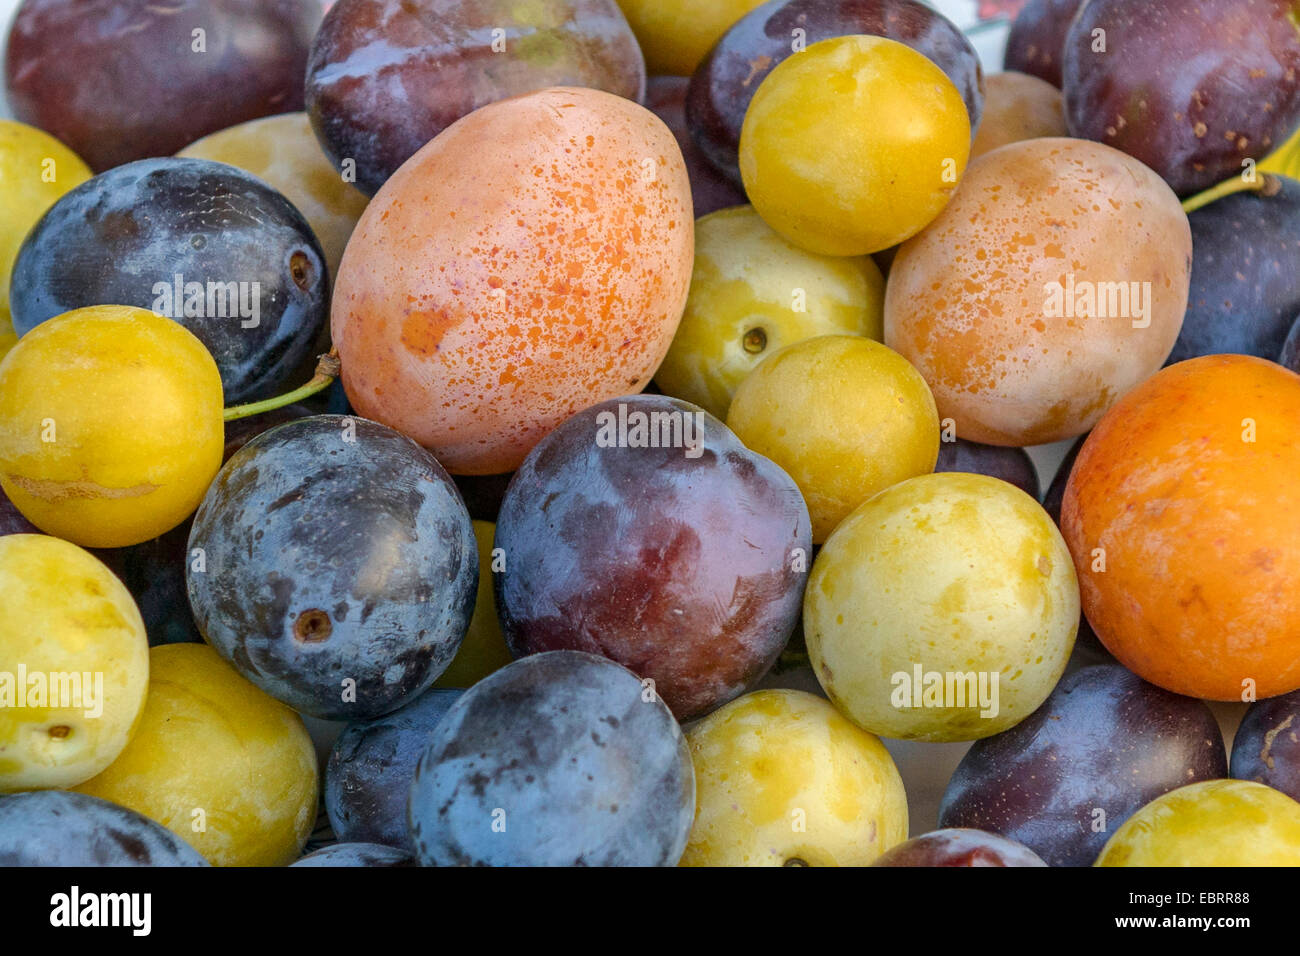 European plum (Prunus domestica), different plums on a plate, Germany, Saxony Stock Photo